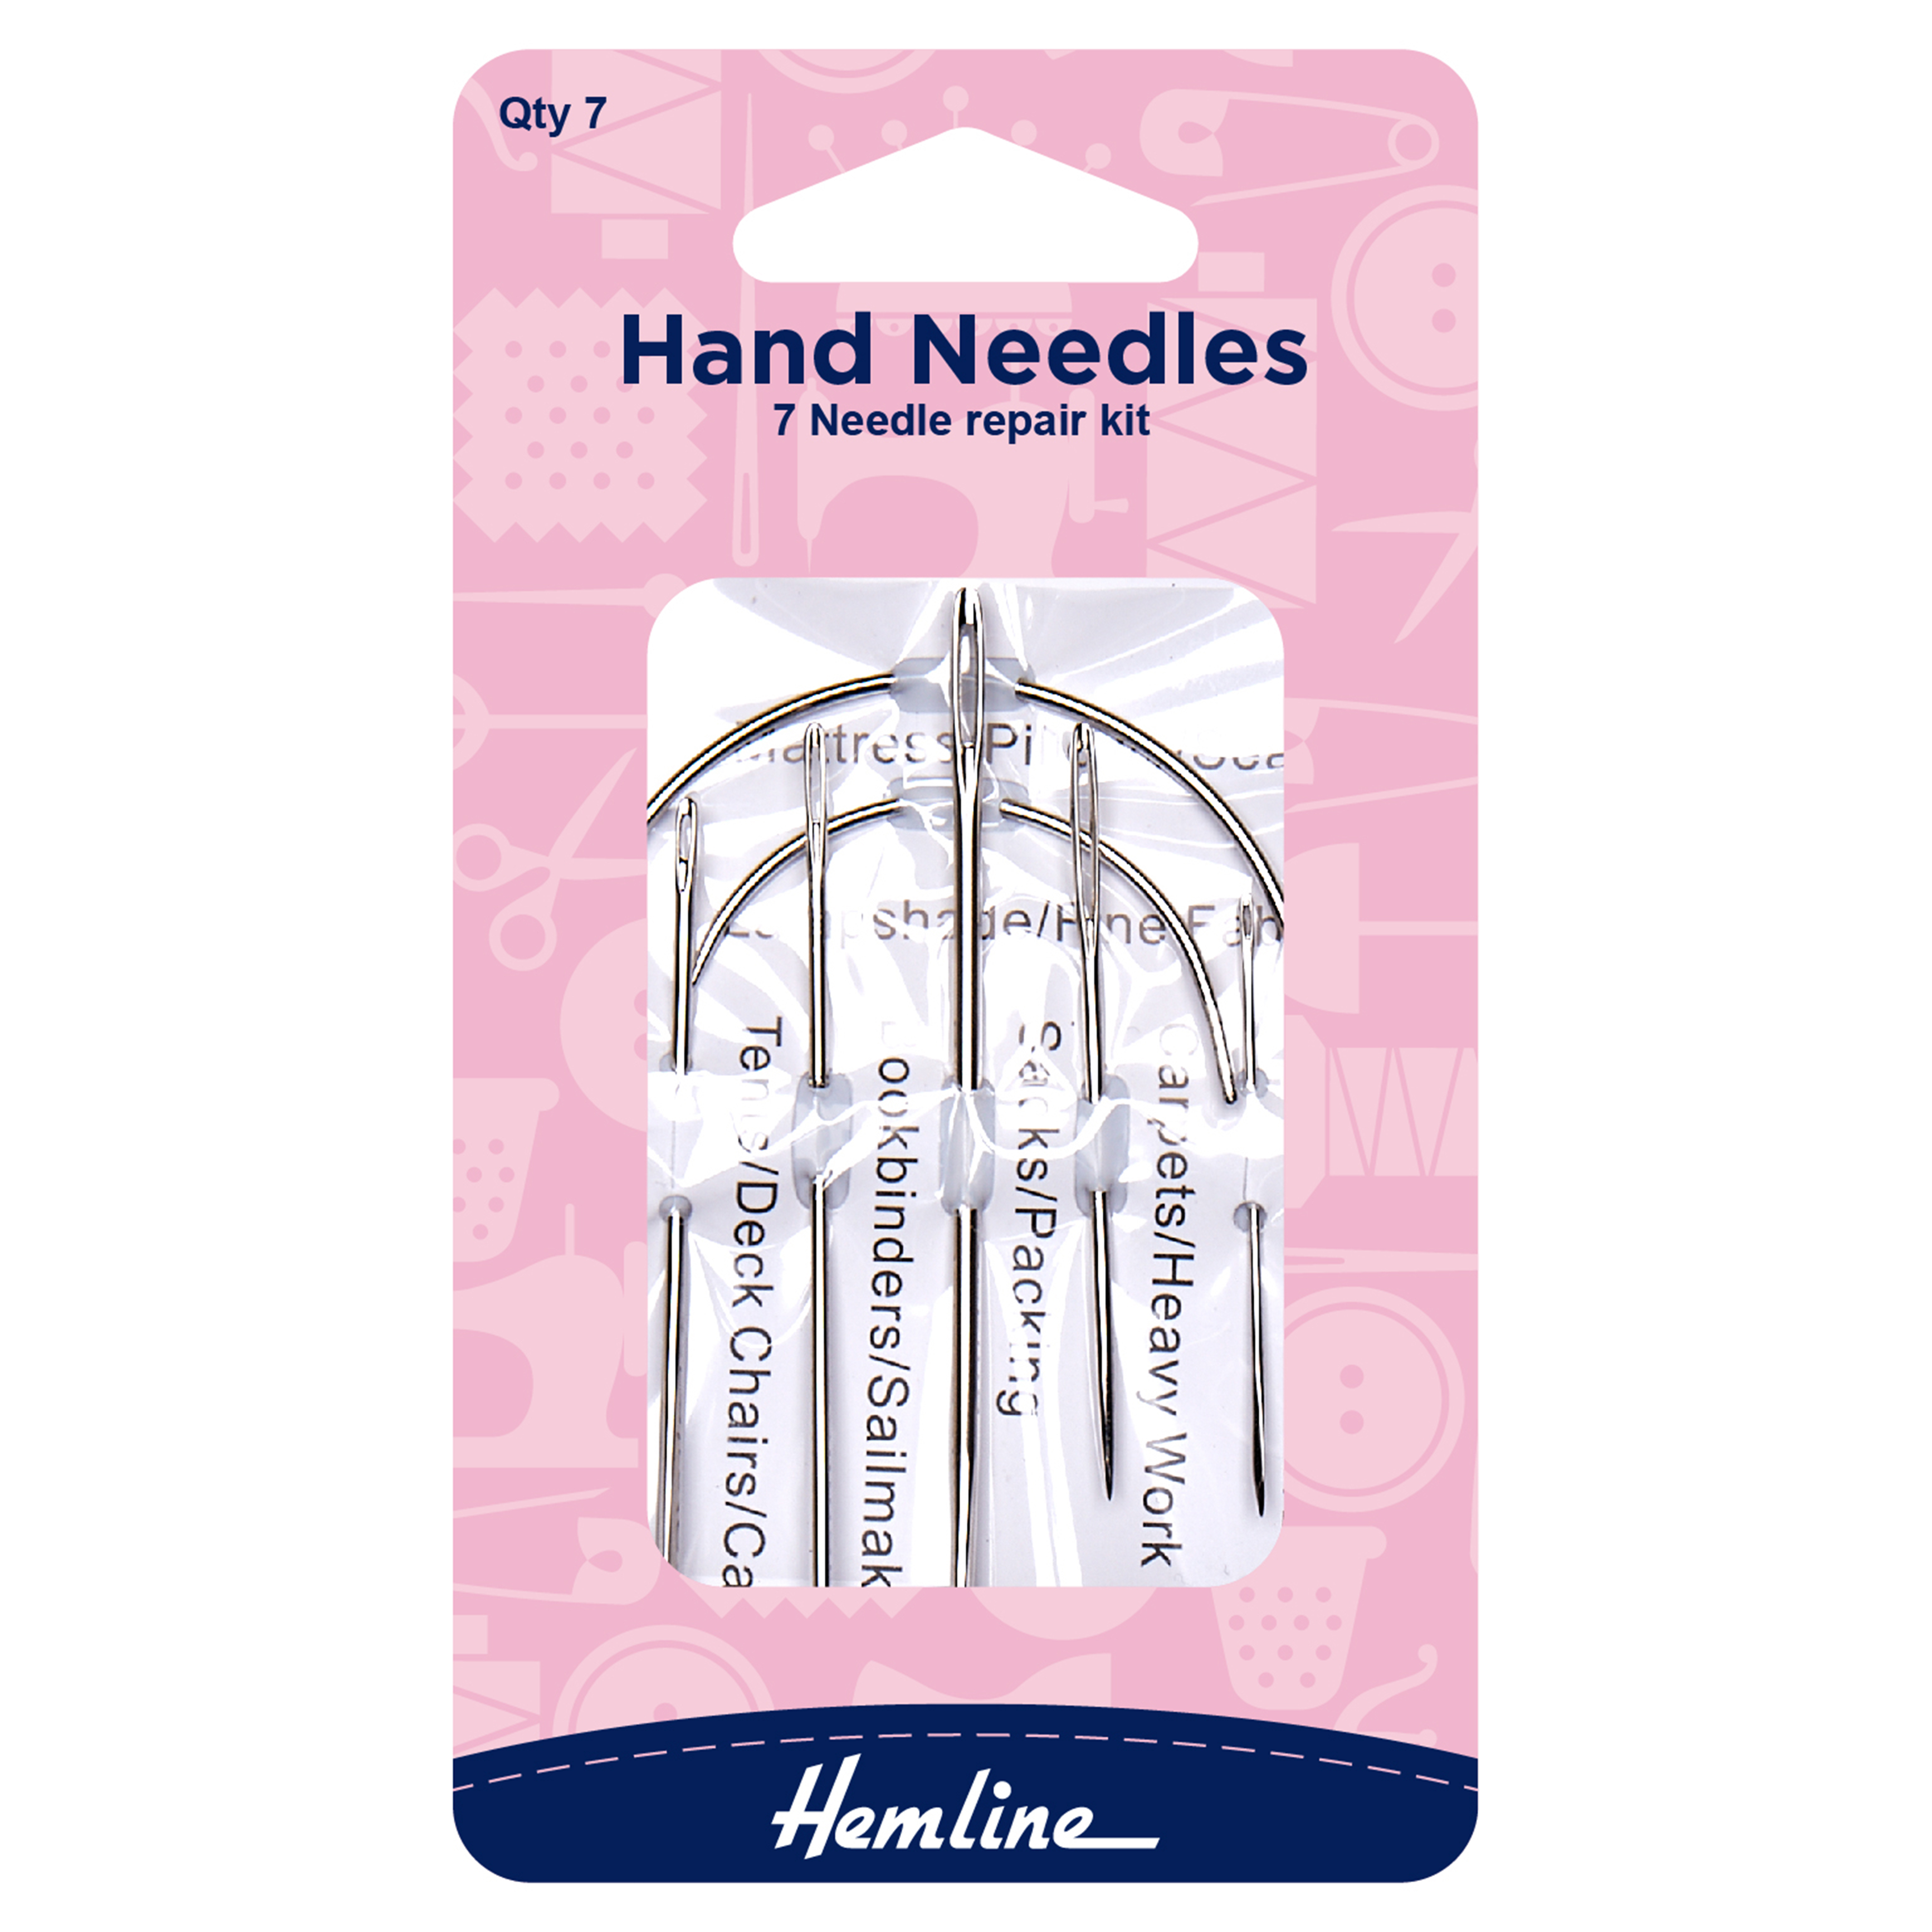 Hand Sewing Needles: Repair: 7 Pieces - Hemline - Groves and Banks